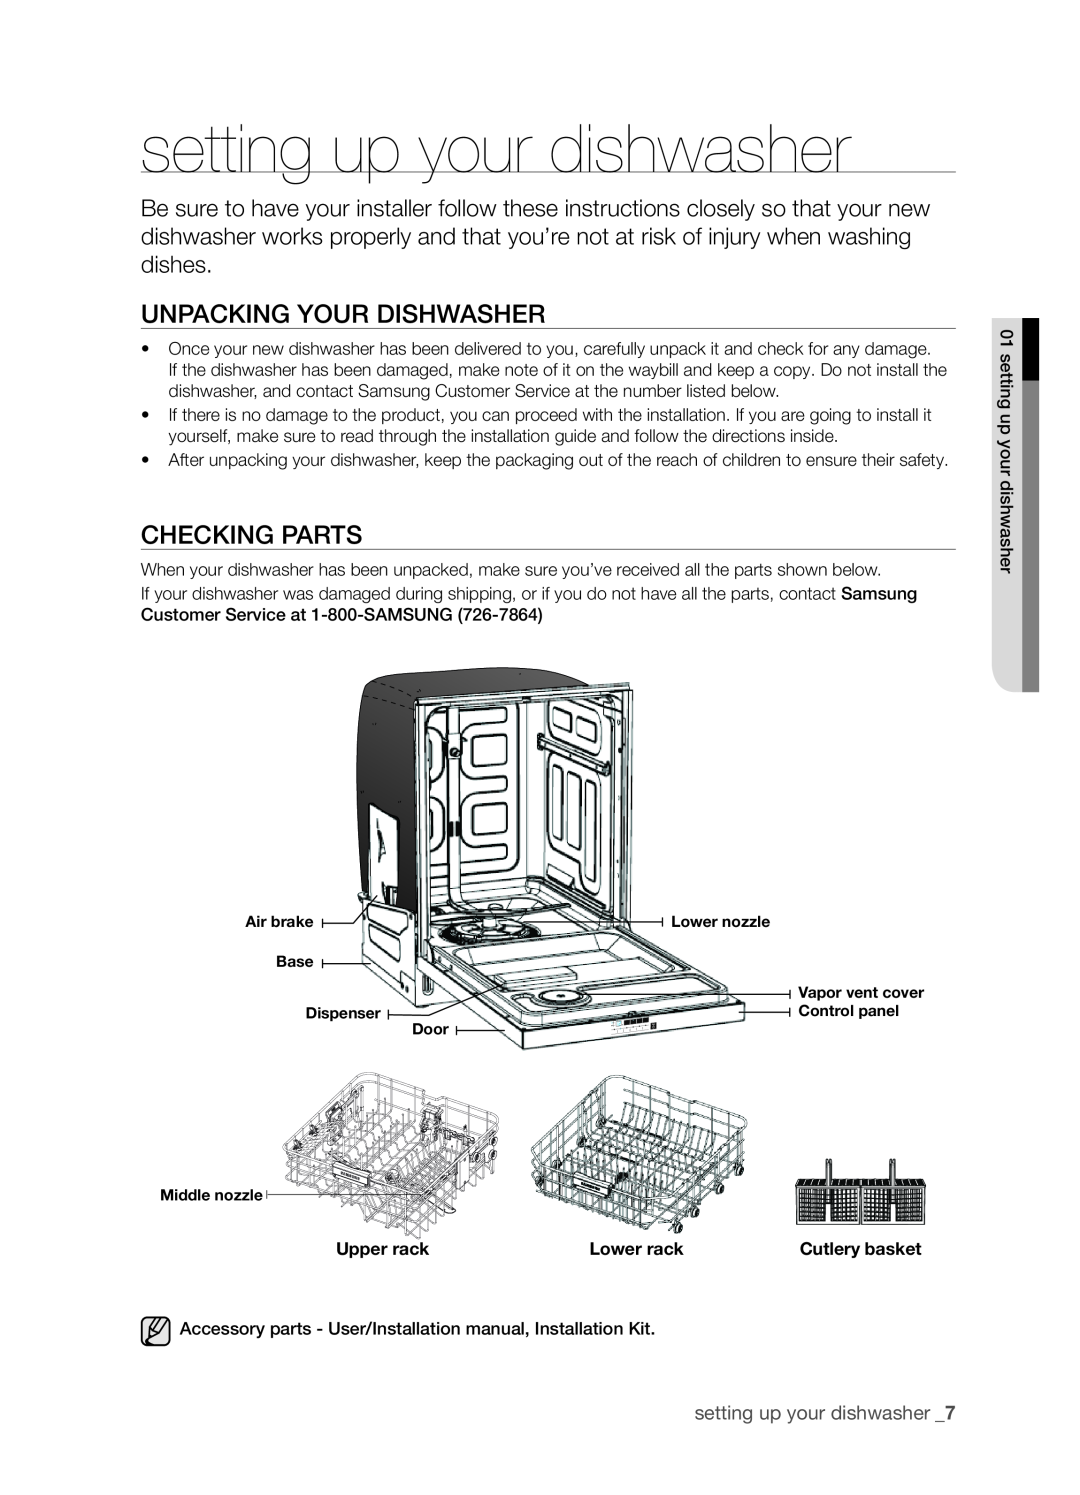 Samsung DMT800RHS, DMT800 Series manual setting up your dishwasher, Unpacking your dishwasher, Checking parts 